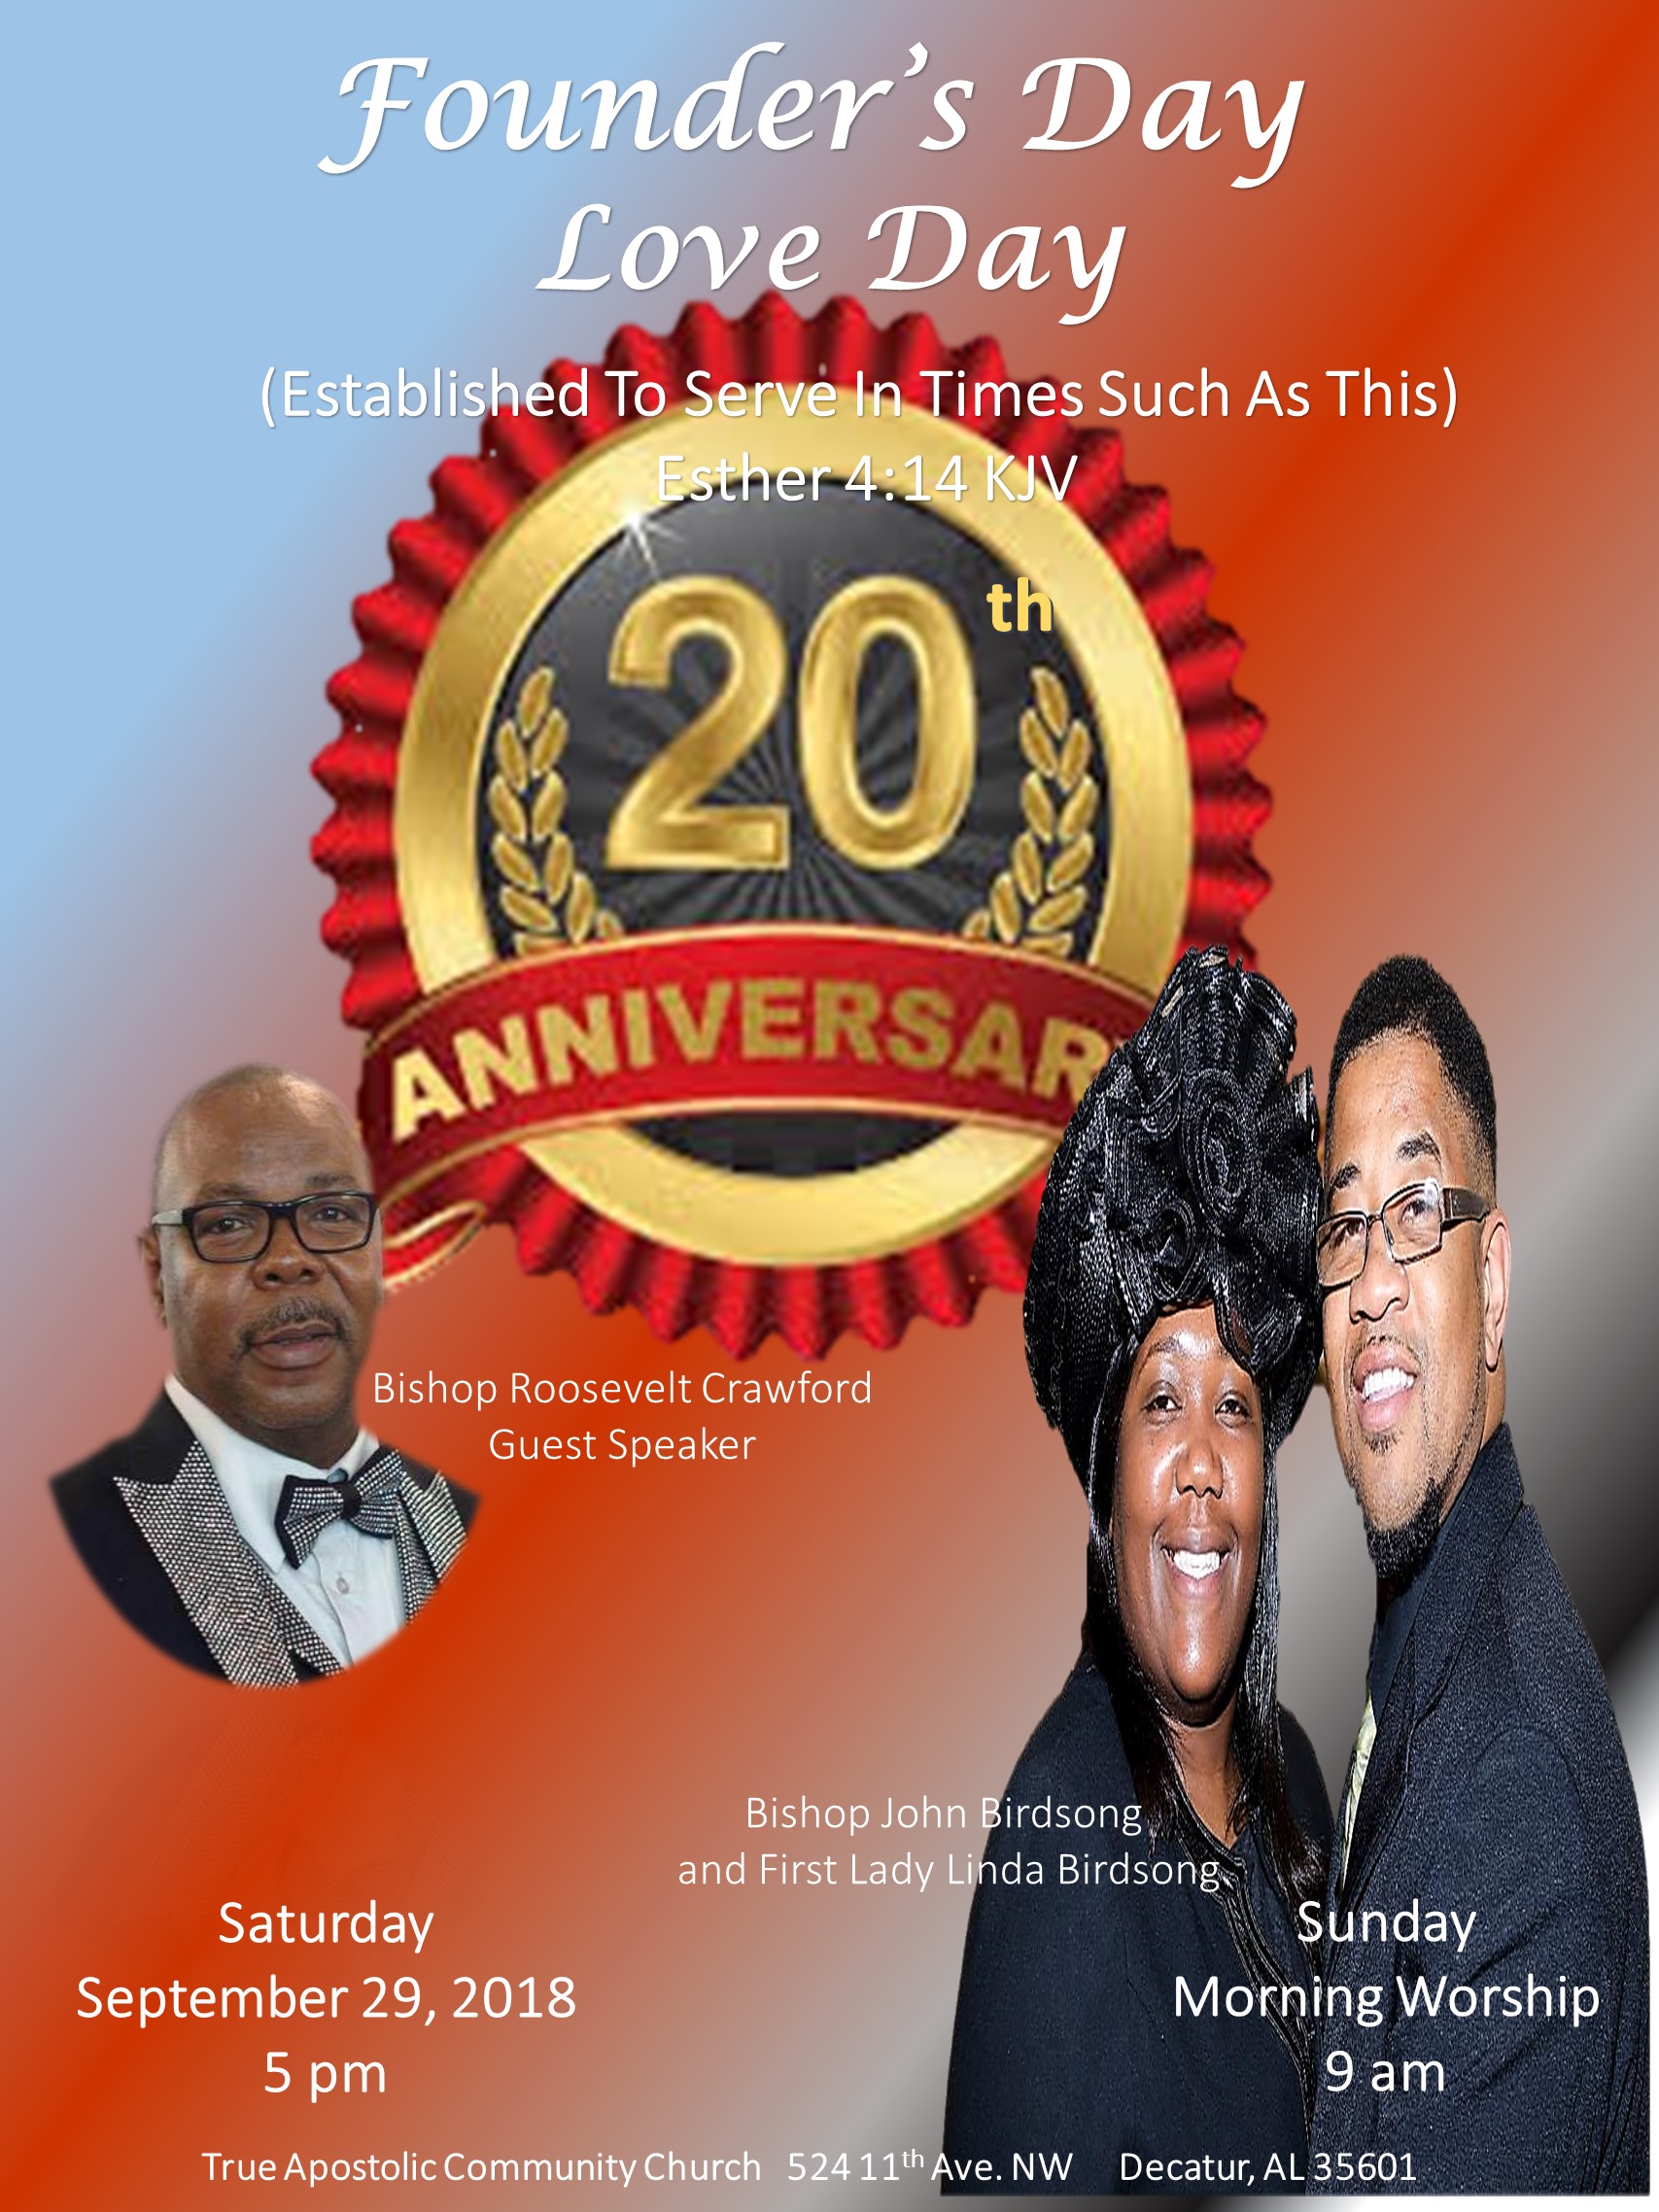 True Apostolic Community Church presents Founders Day and Love Day